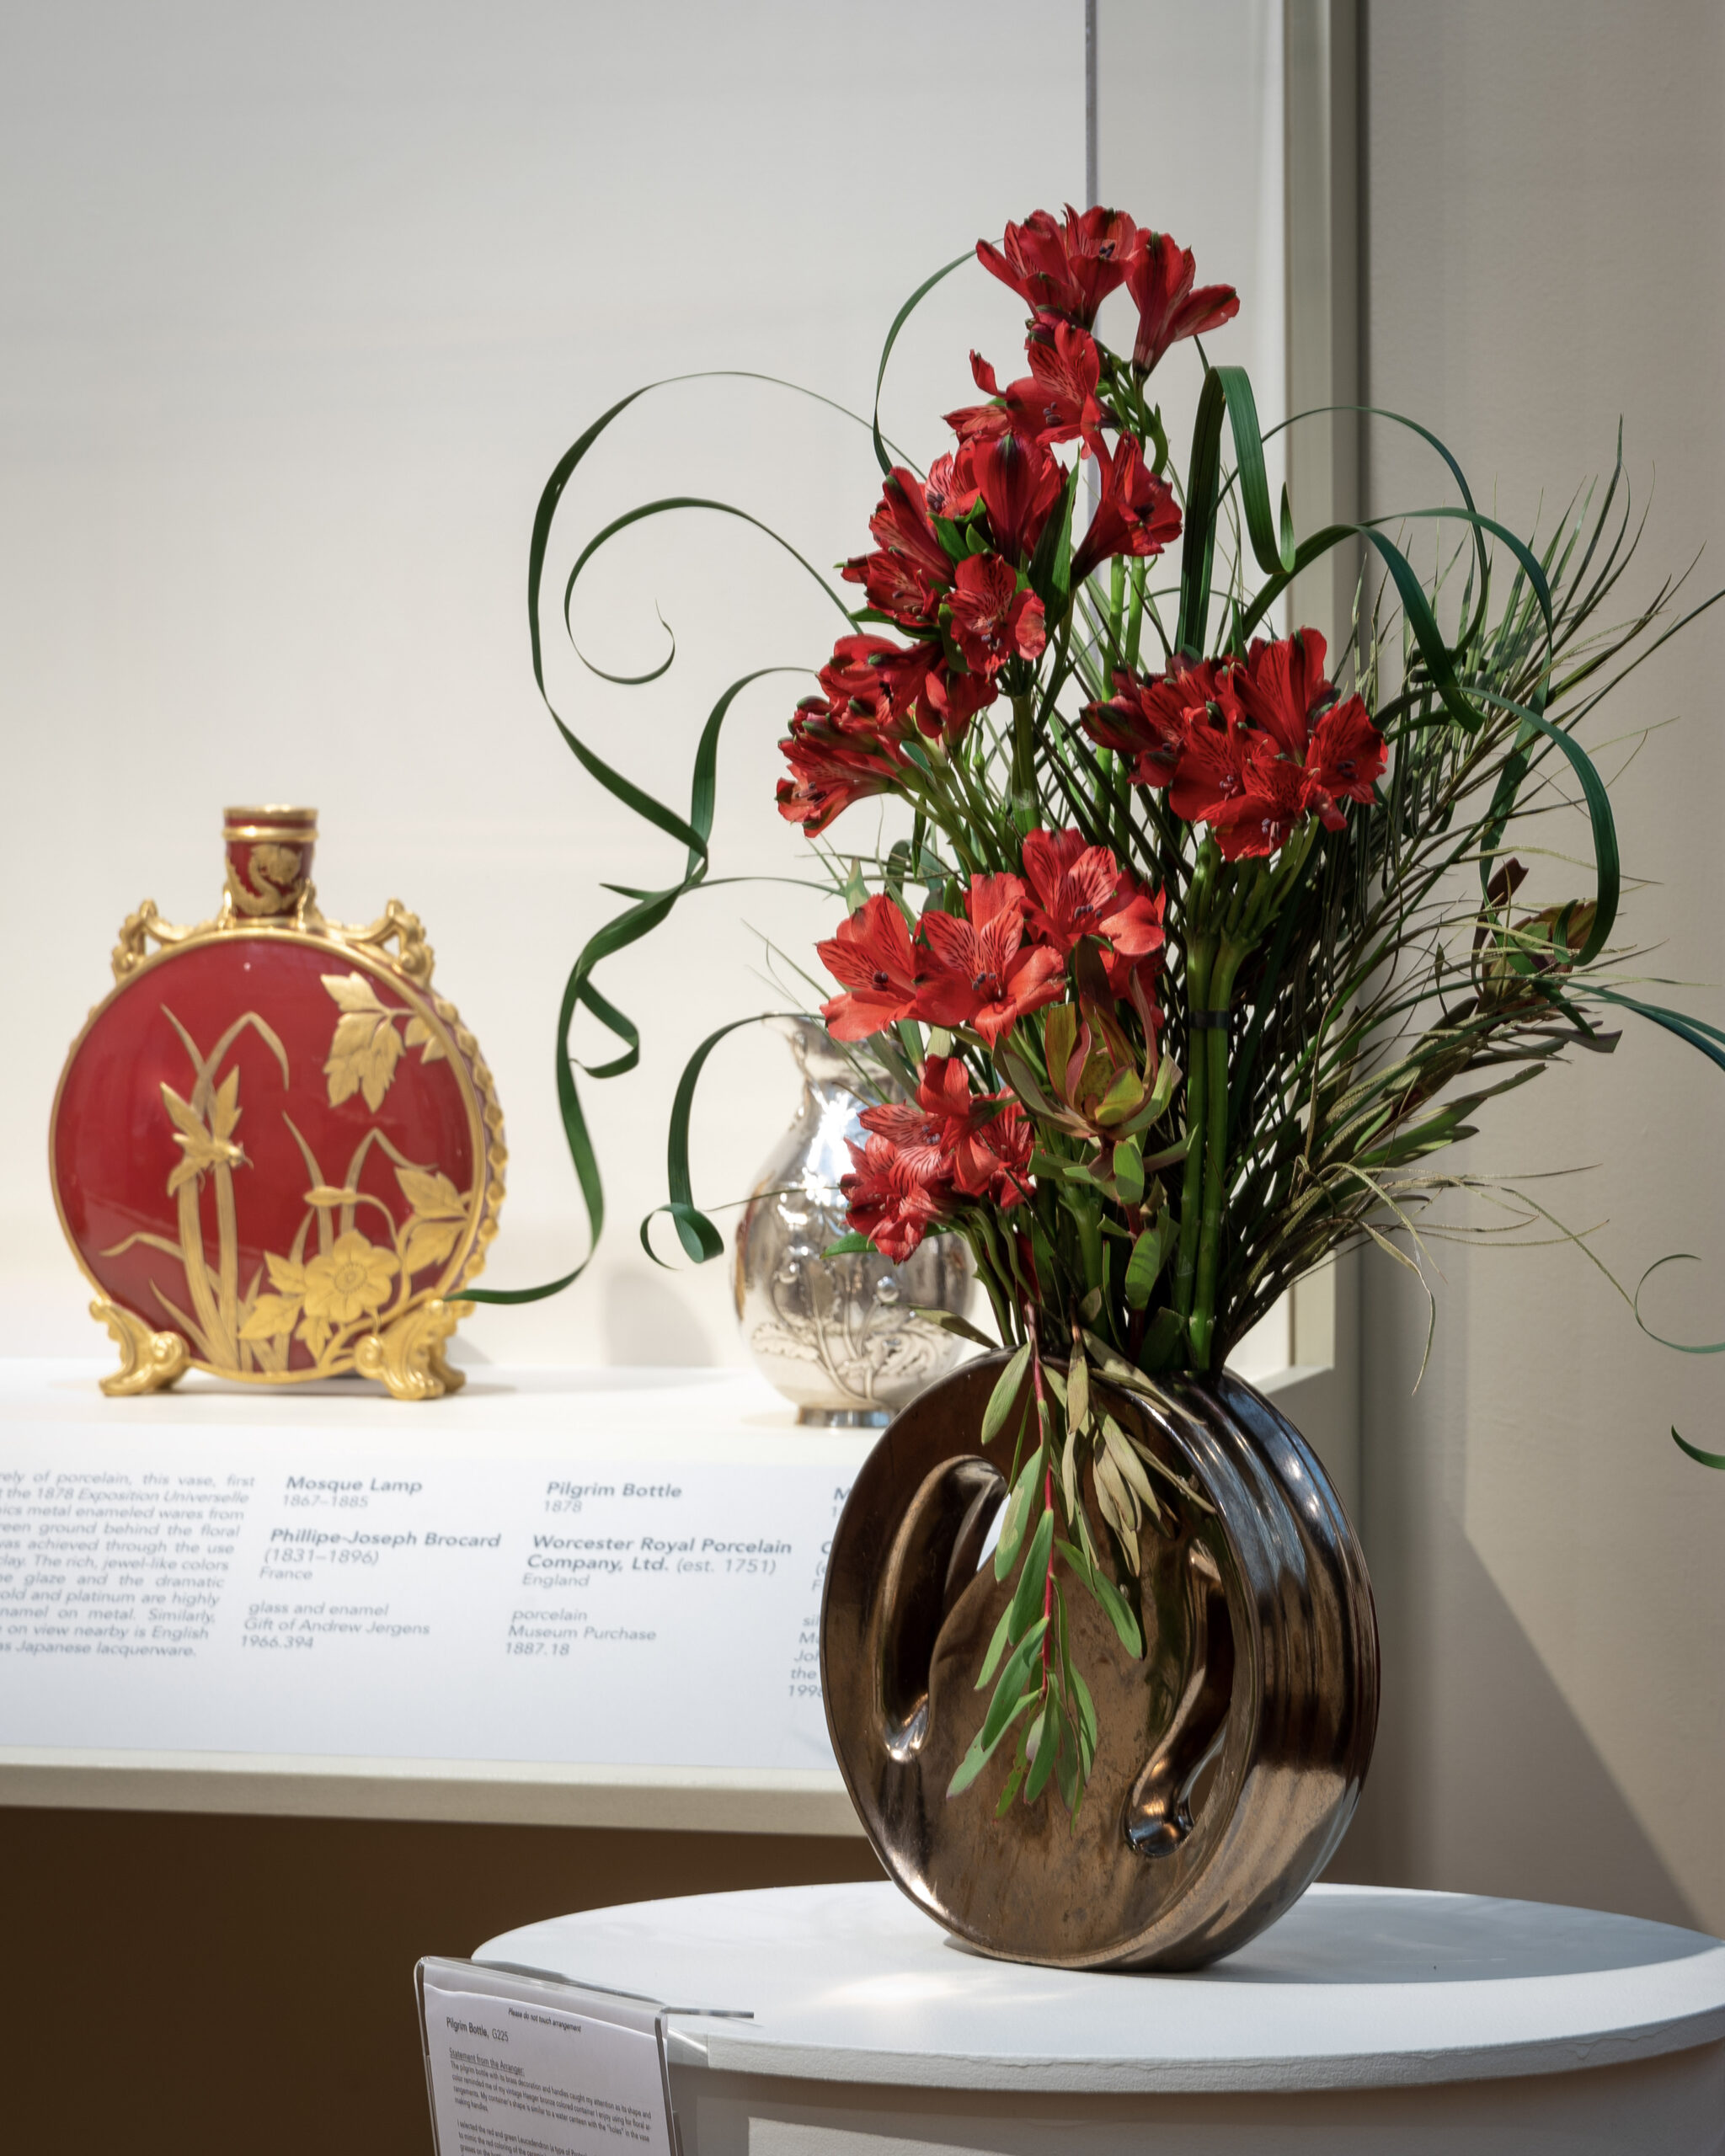 A red and gold porcelain bottle with a pattern of leaves on it, and a red and gold flower arrangement